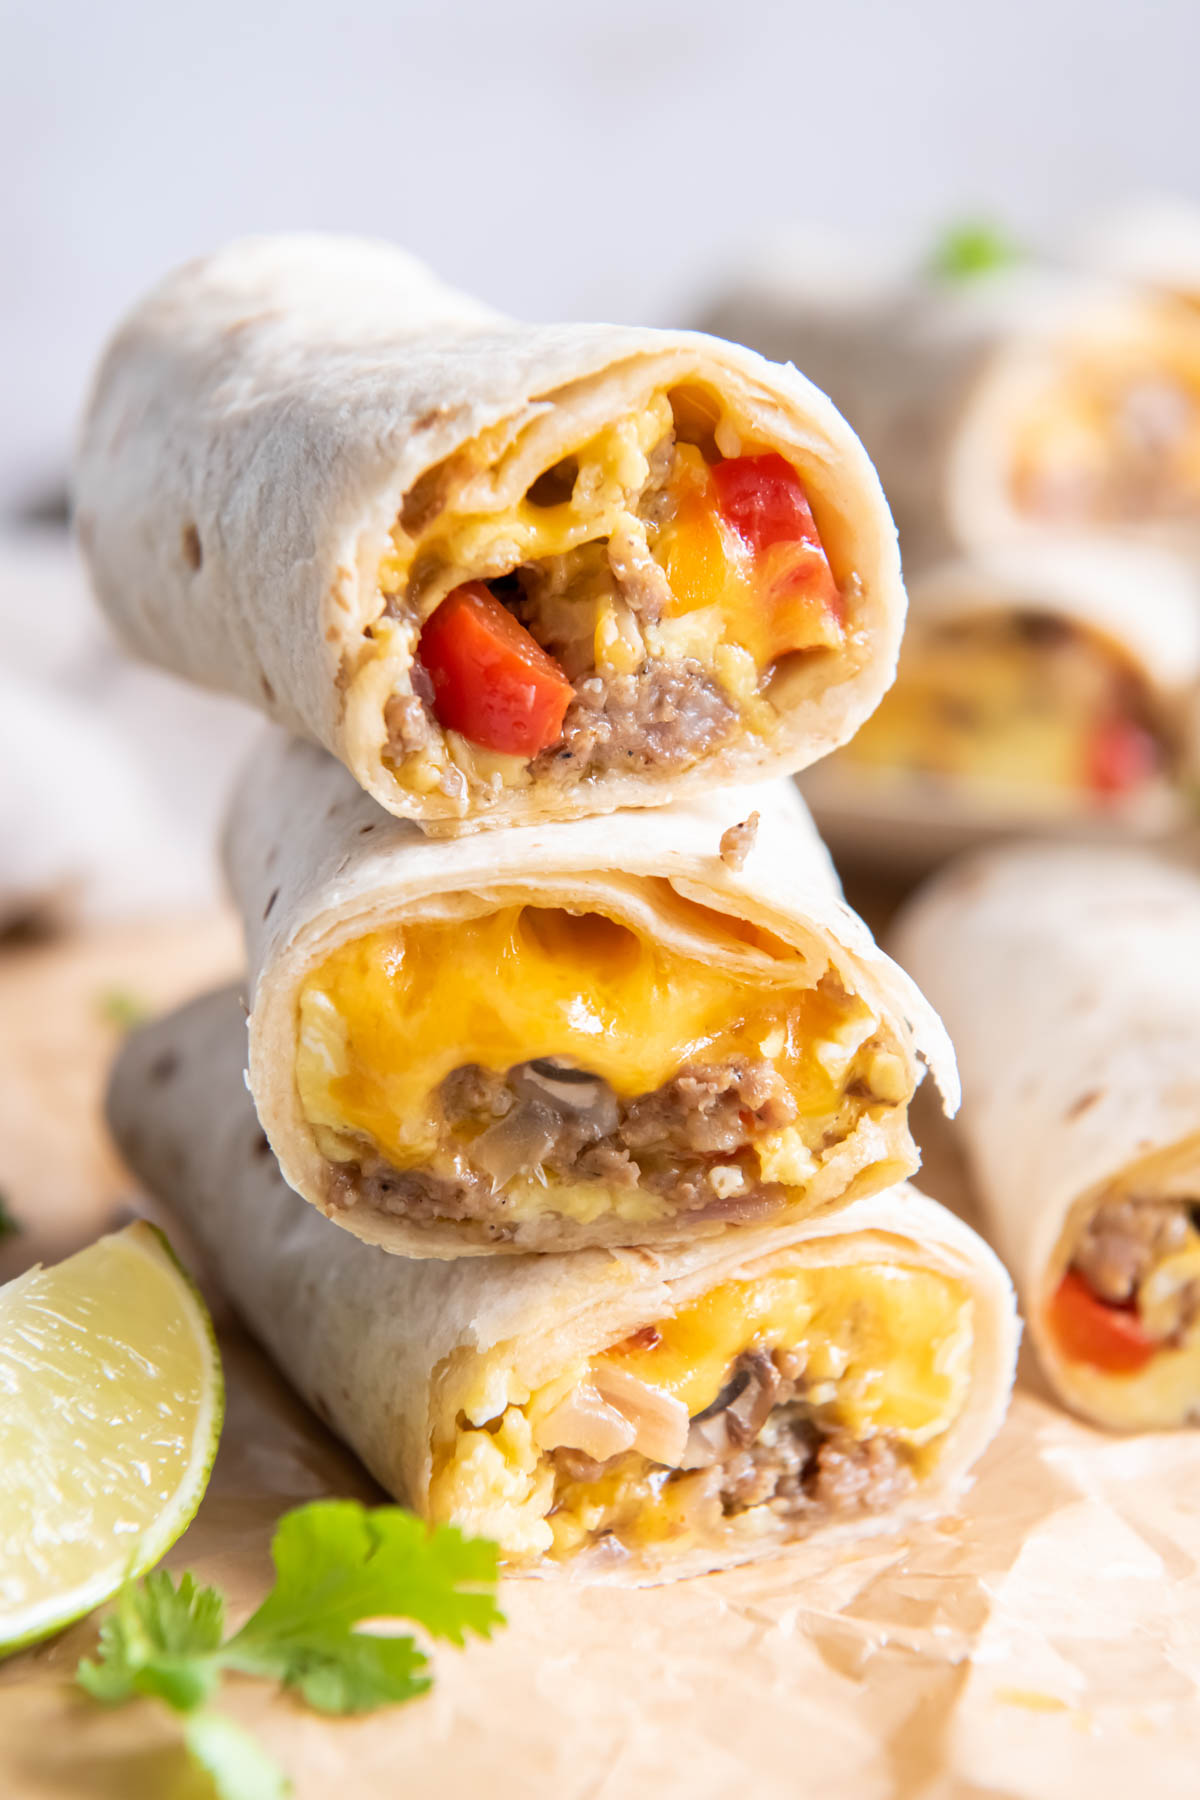 Three breakfast burritos stacked on top of each other and cut in half so you can see the sausage, eggs, cheese and vegetables inside.